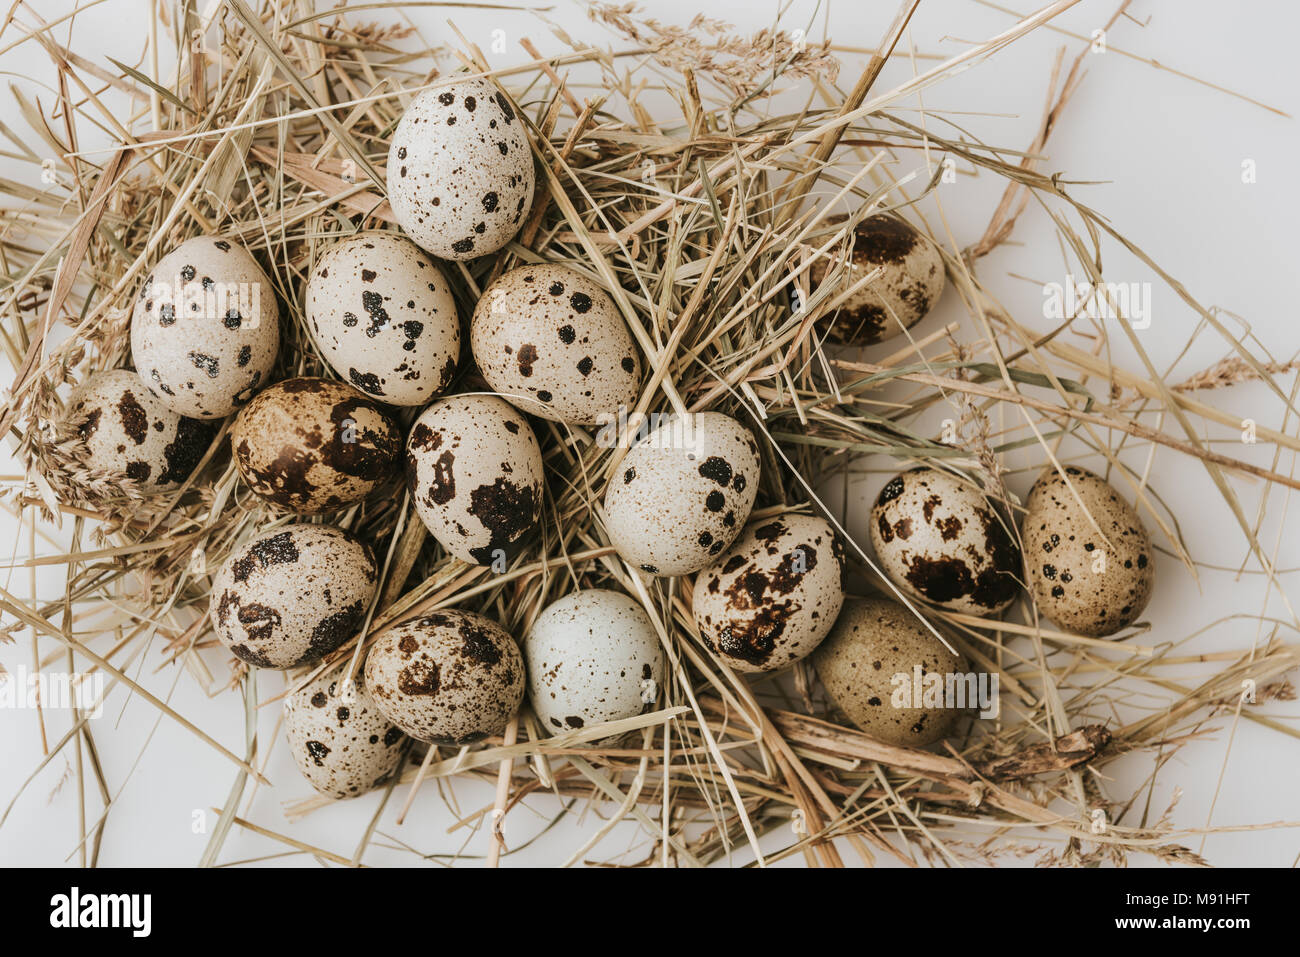 quail eggs laying on straw over white background Stock Photo